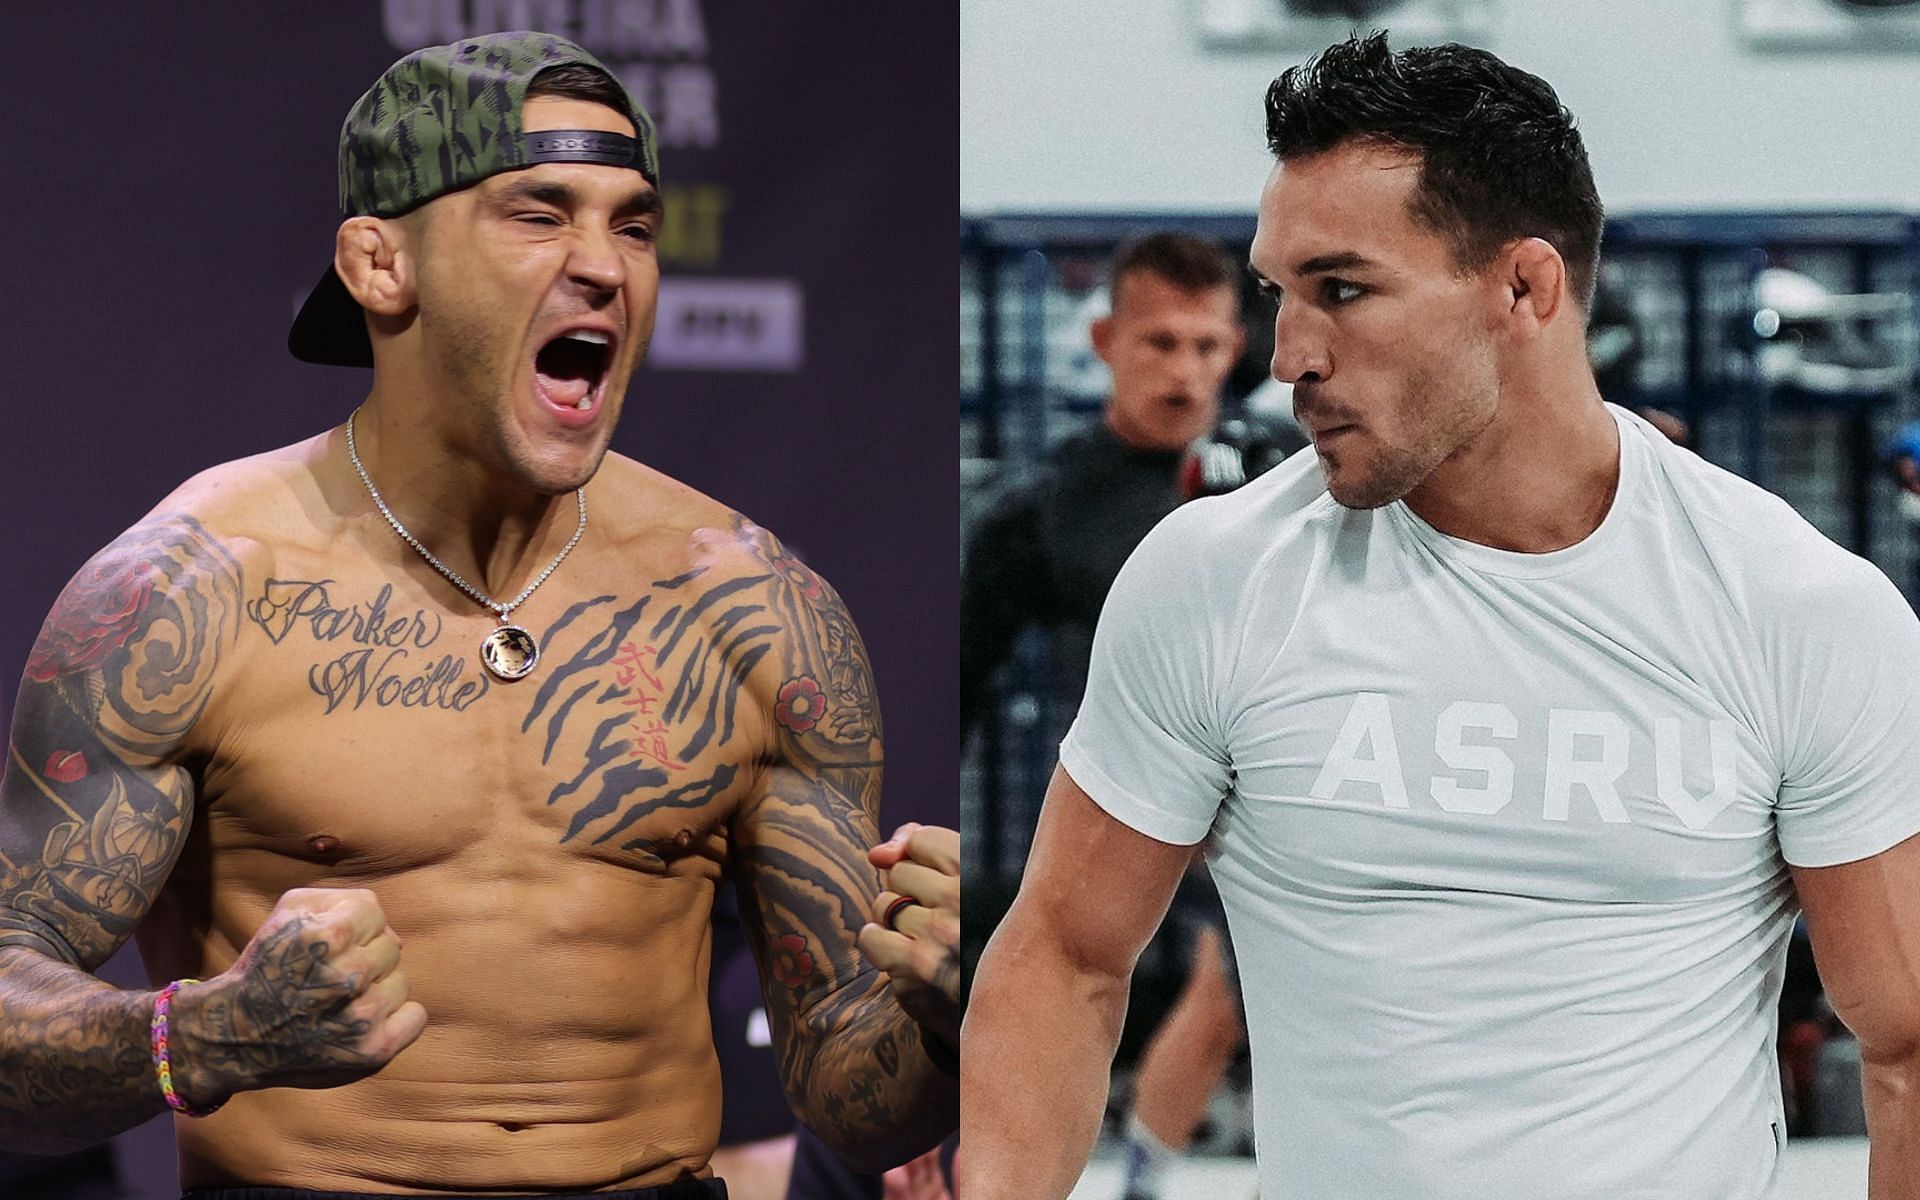 Dustin Poirier (Left), Michael Chandler (Right) [Image courtesy: Getty and @mikechandlermma on Instagram]